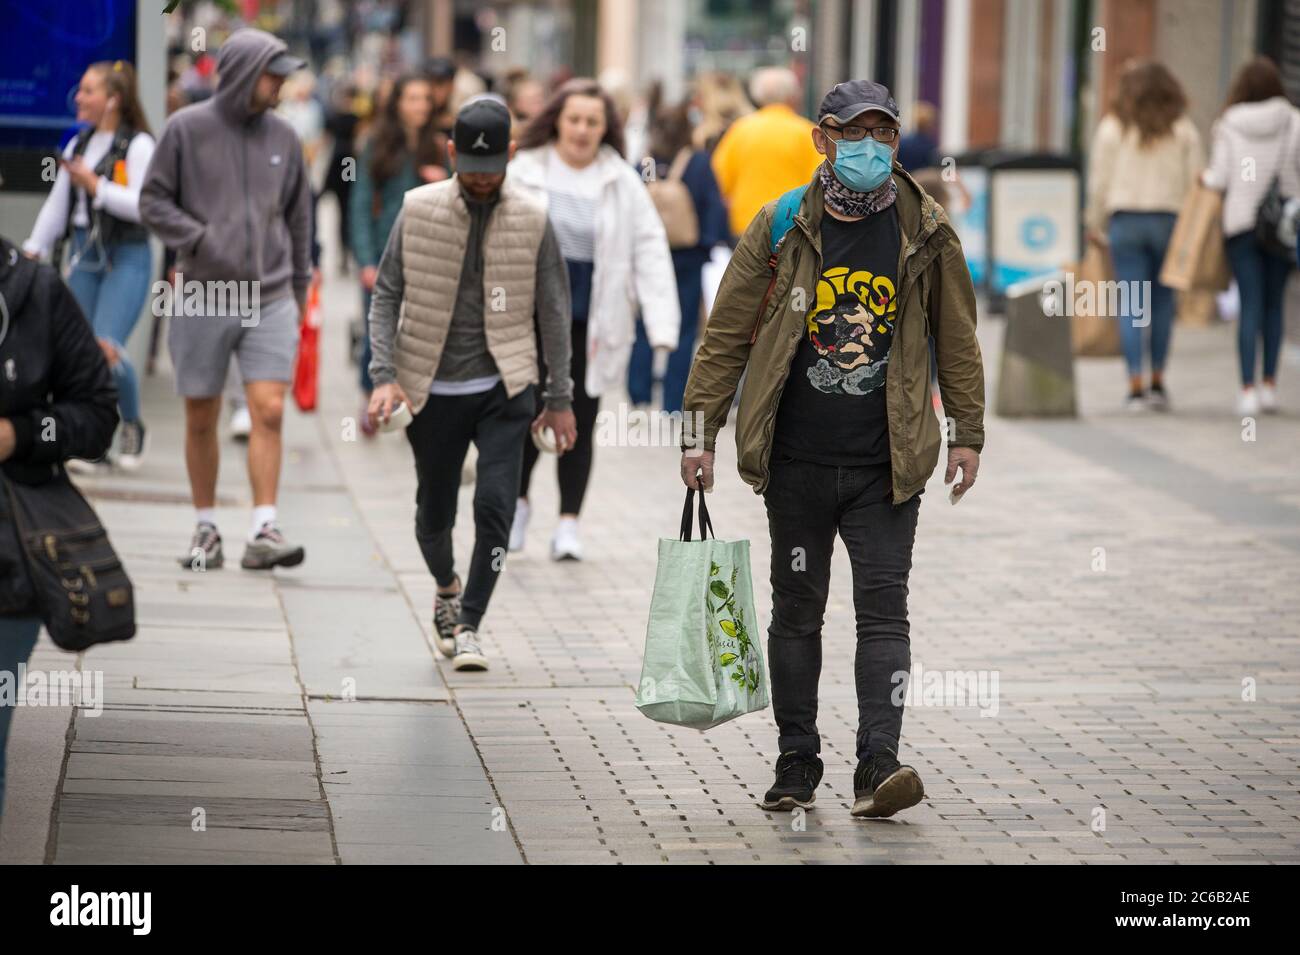 Glasgow, Scotland, UK. 8th July, 2020. Pictured: People wearing cafe masks and face coverings whilst out shopping in Glasgow city centre. Nicola Sturgeon announced on the 2nd July that wearing a face covering in shops will become mandatory on the10th July. Face coverings are already mandatory when taking public transport in a bid to slow down the spread of coronavirus. Credit: Colin Fisher/Alamy Live News Stock Photo